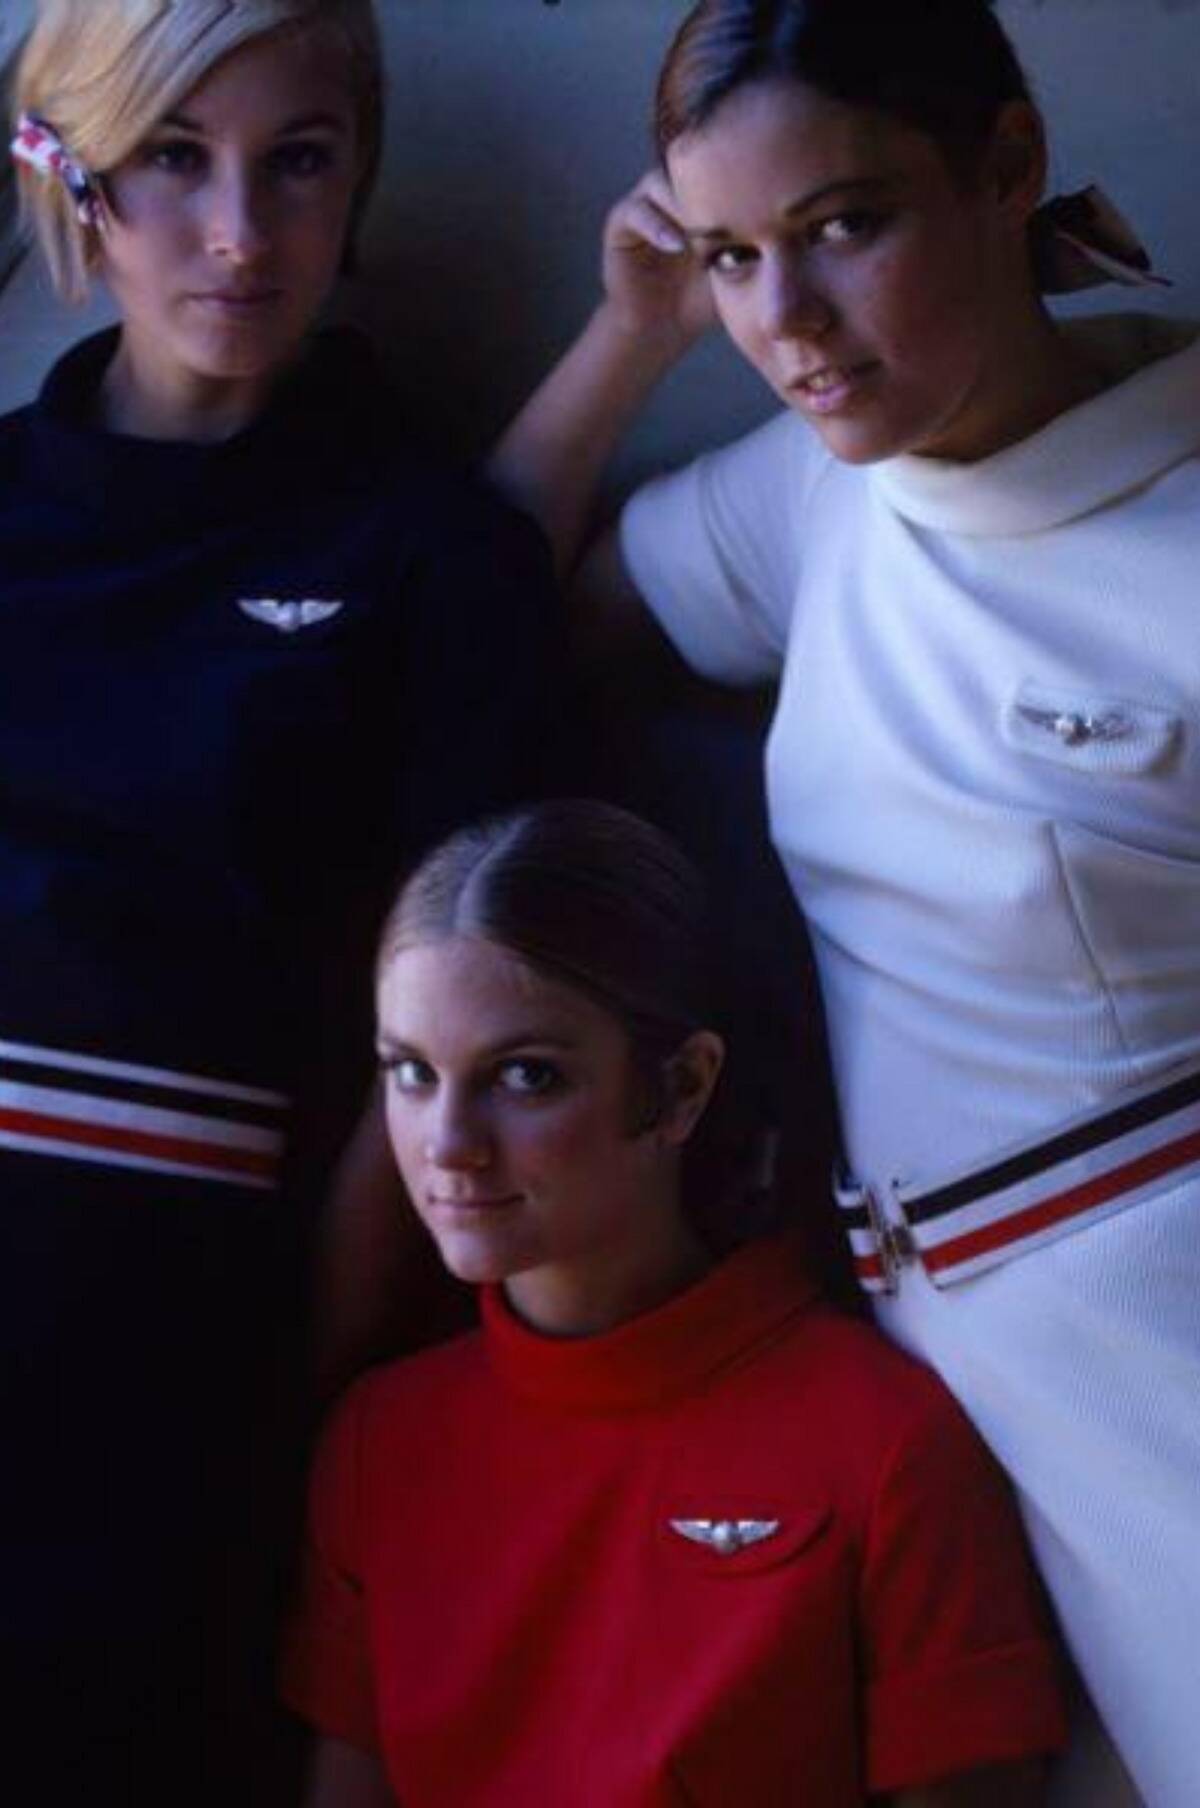 <p>In 1967, several airlines branded their flight attendants as women at the service of their male customers. United airlines promised, "Every [passenger] gets warmth, friendliness and extra care. And someone may get a wife."</p> <p>As mentioned earlier, it was a requirement for flight attendants to be unmarried, with no children. They also encouraged the female stewardesses to be very friendly with the male customers, who made up the majority of the airlines' customers.</p>